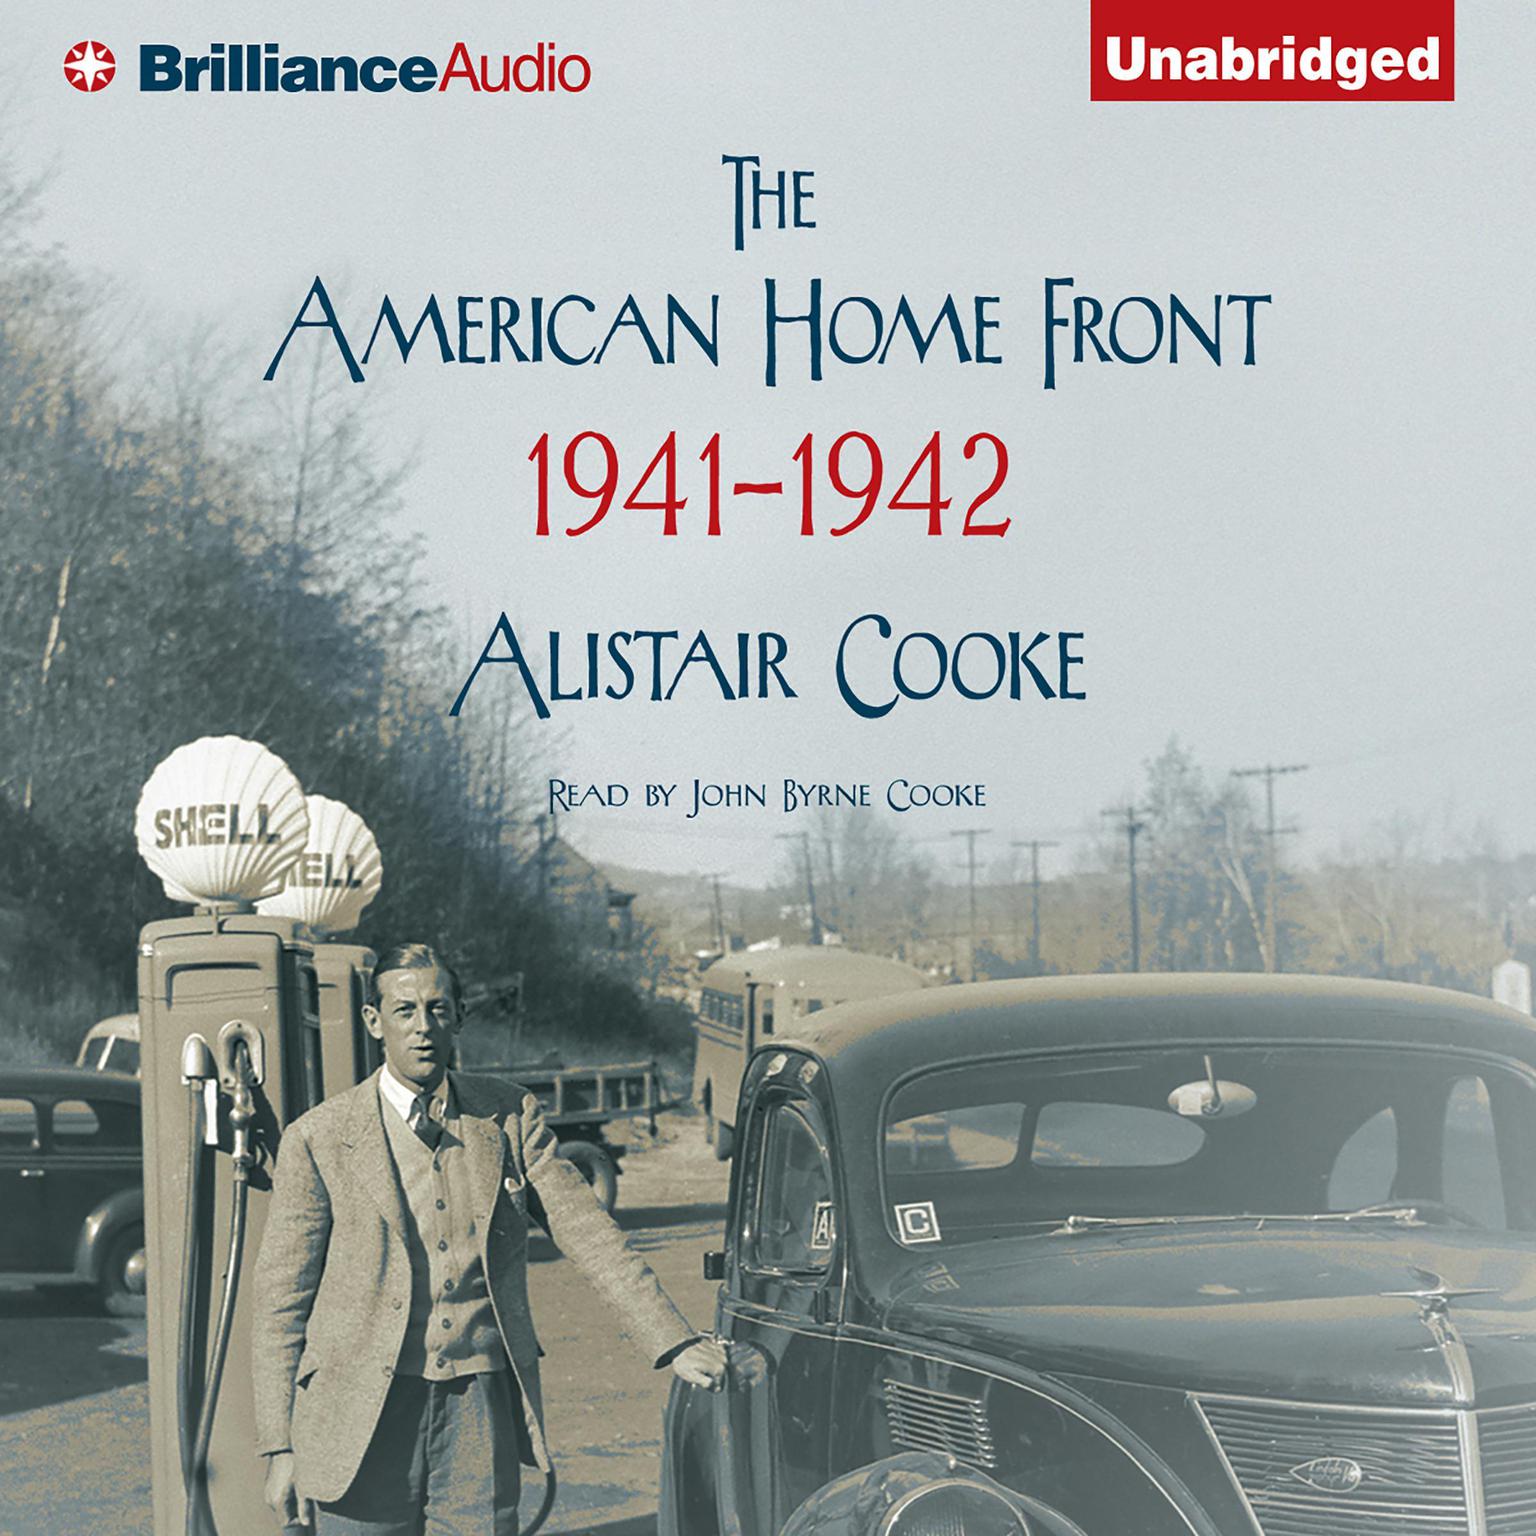 The American Home Front: 1941-1942 Audiobook, by Alistair Cooke